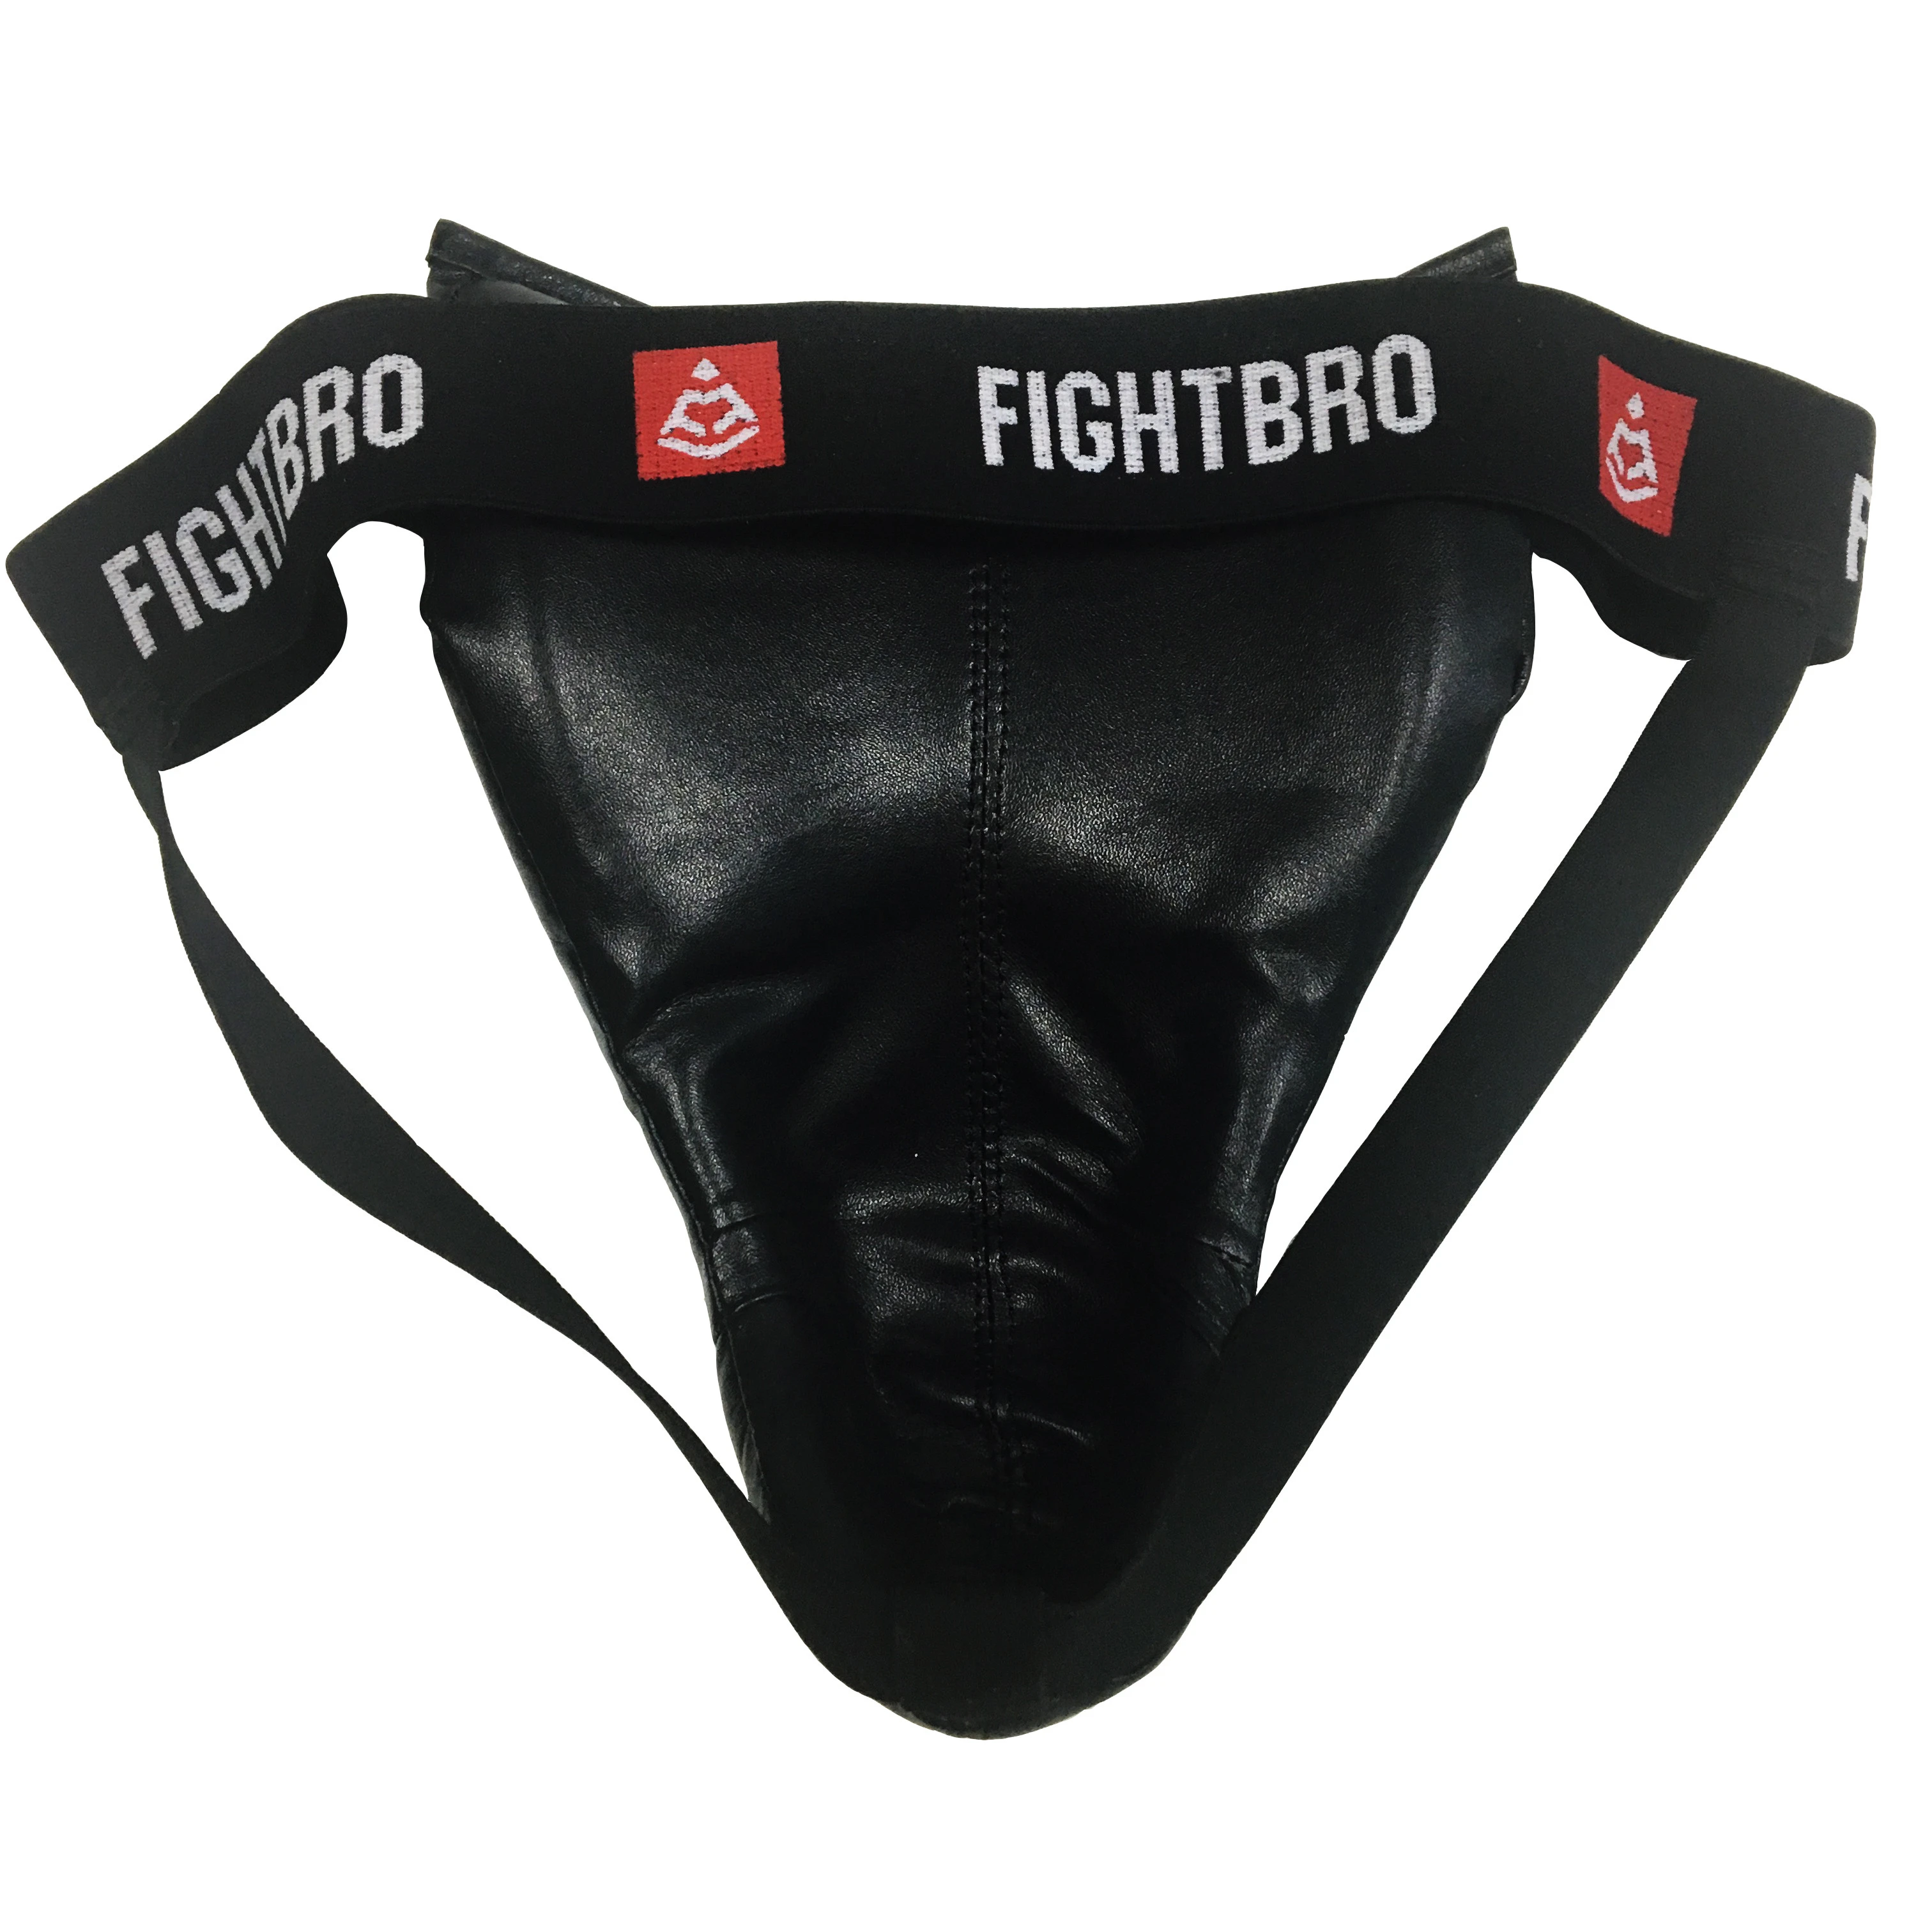 Boxing Groin Guards, Martial Arts Groin Guards Protective Equipment, MMA Groin Guard